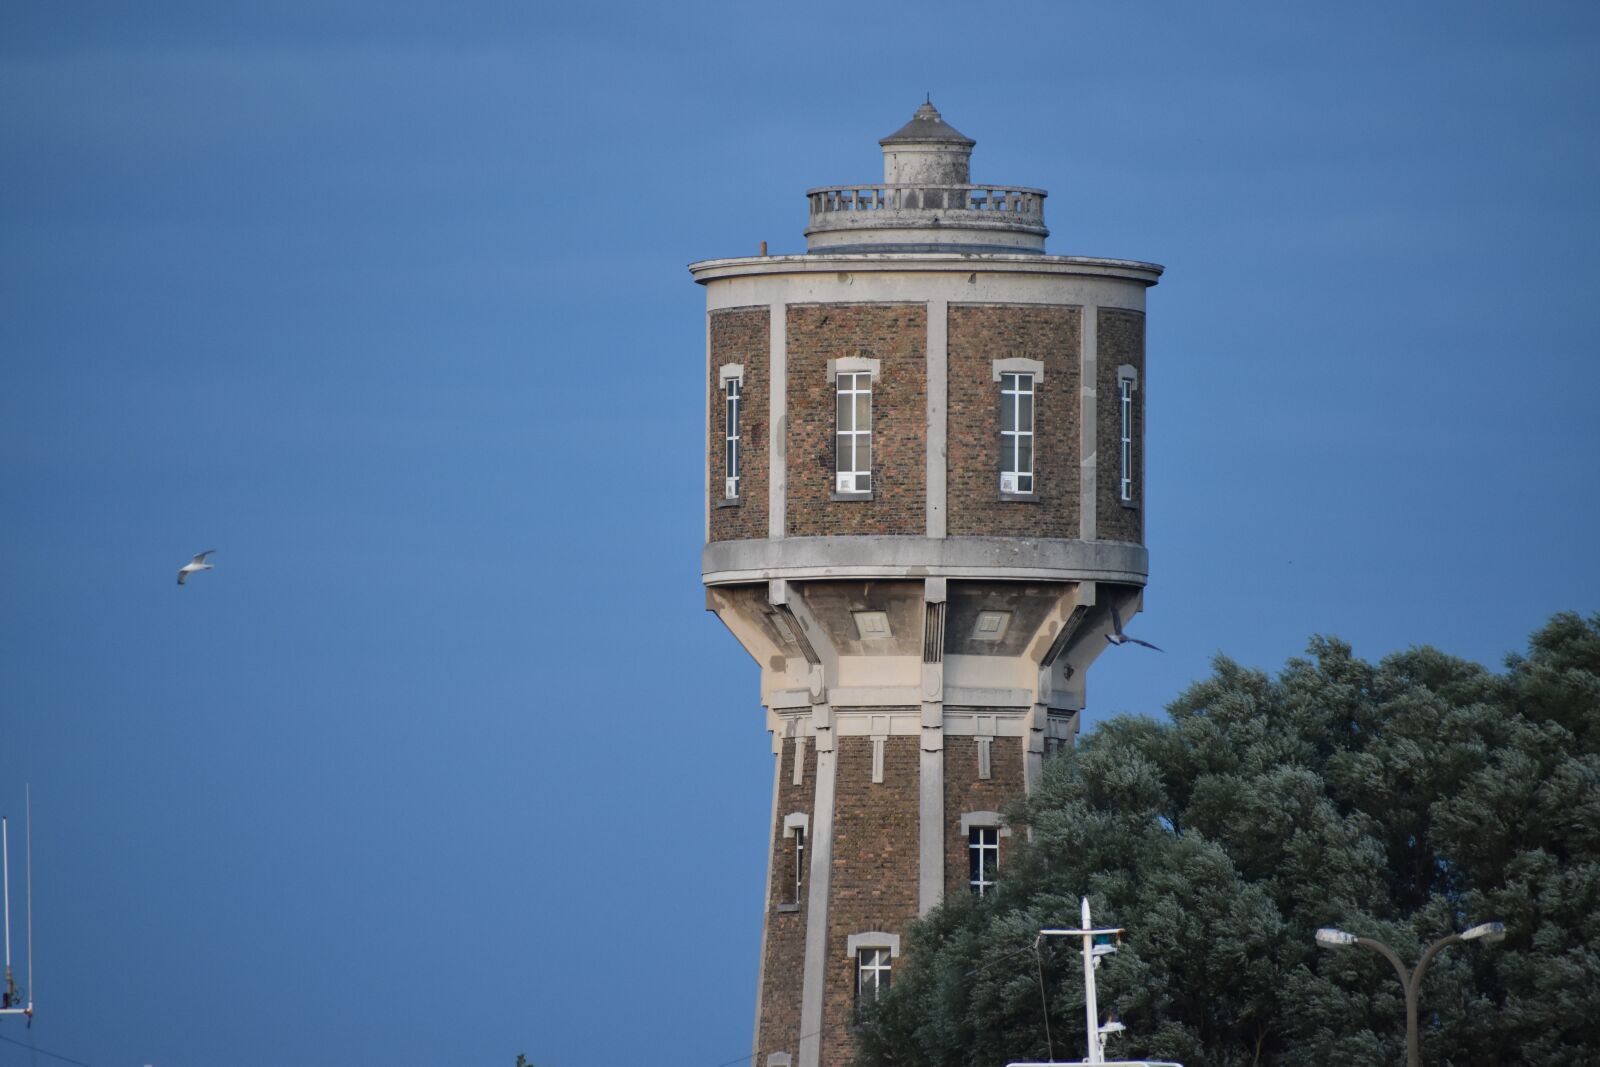 Nikon D3500 sample photo. Water tower, building, architecture photography